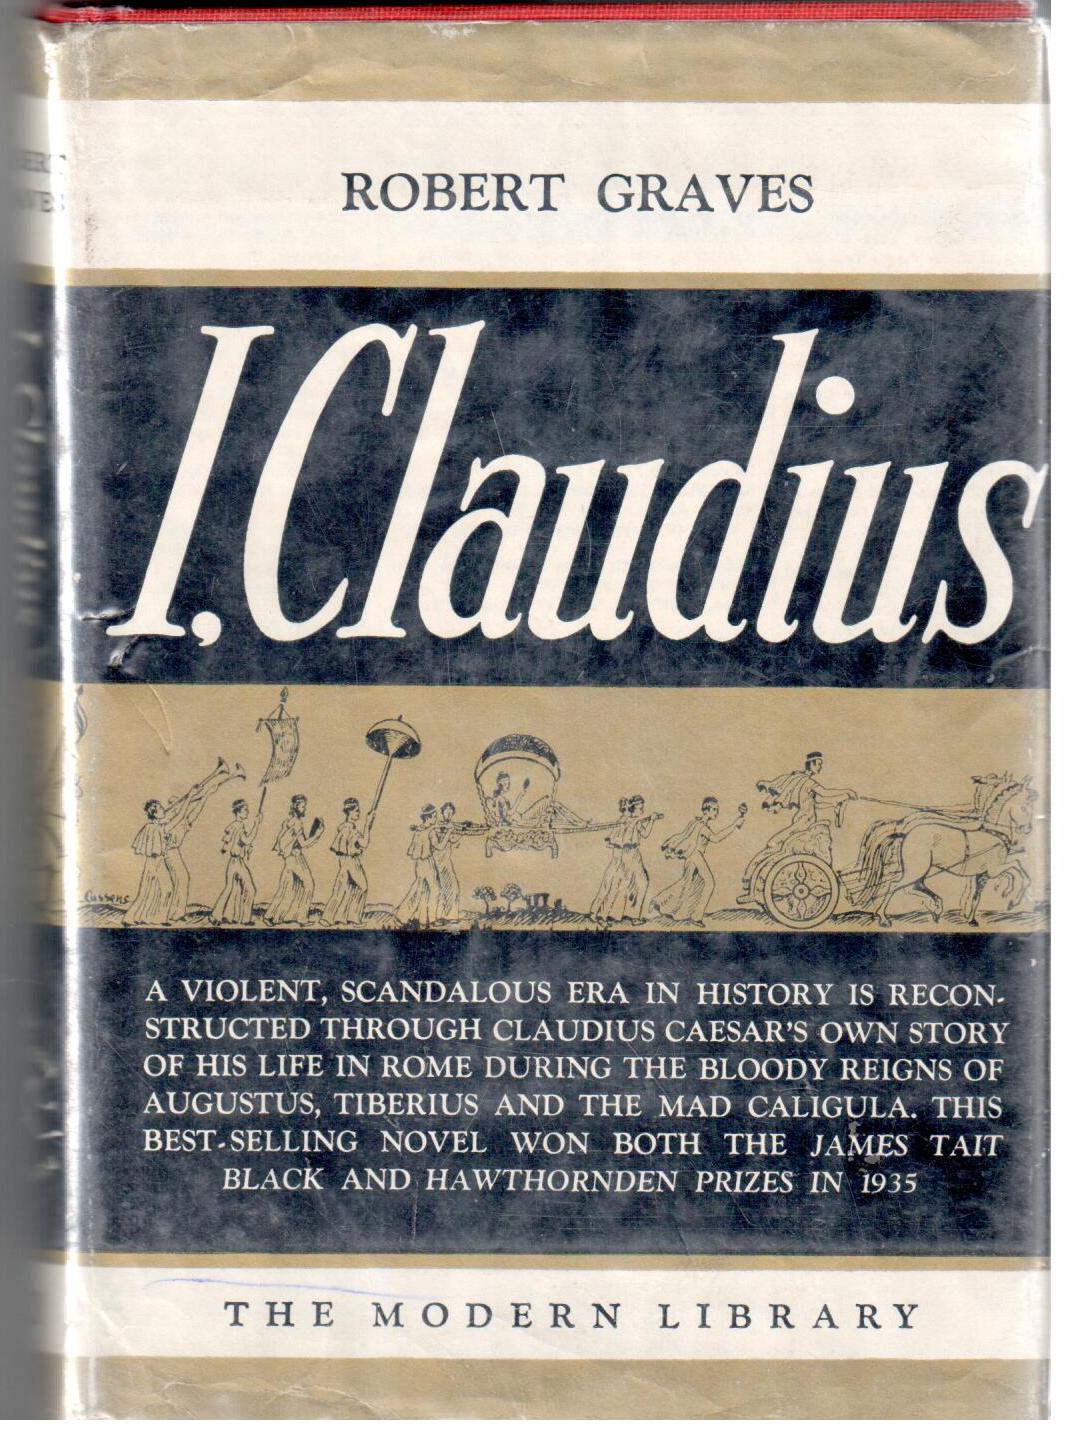 I, Claudius; : from the autobiography of Tiberius Claudius, born B.C. 10, murdered and deified A.D. 54,